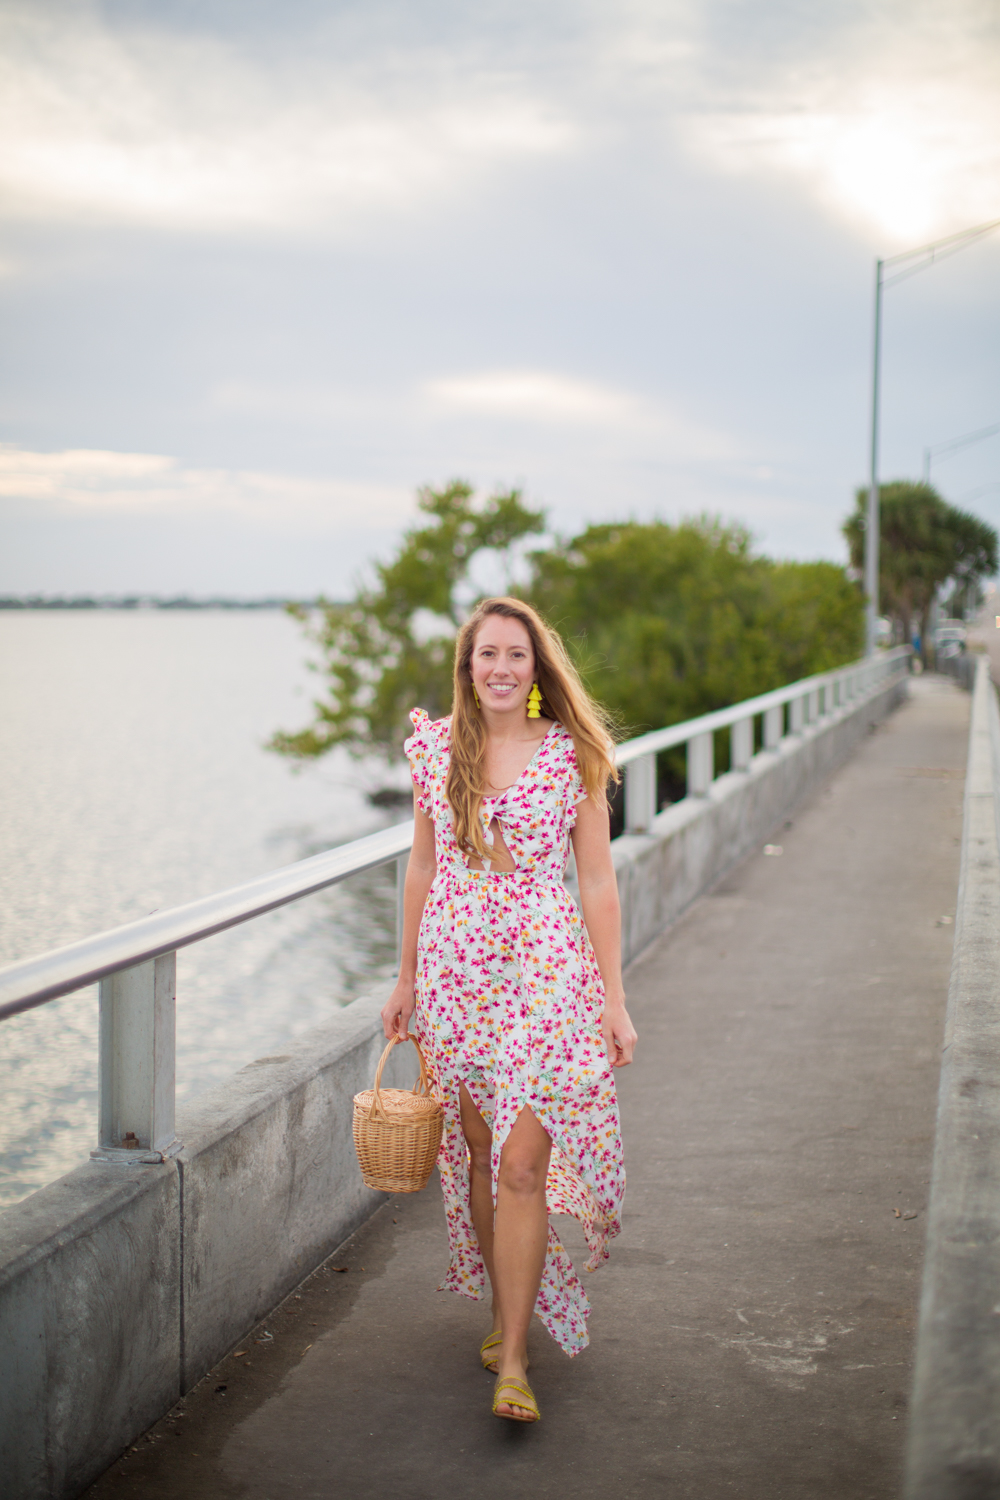 Floral Dresses for Spring / How to Style a Floral Dress / What to Wear on a Warm-Weather Vacation - Sunshine Style: A Florida Based Fashion Blog